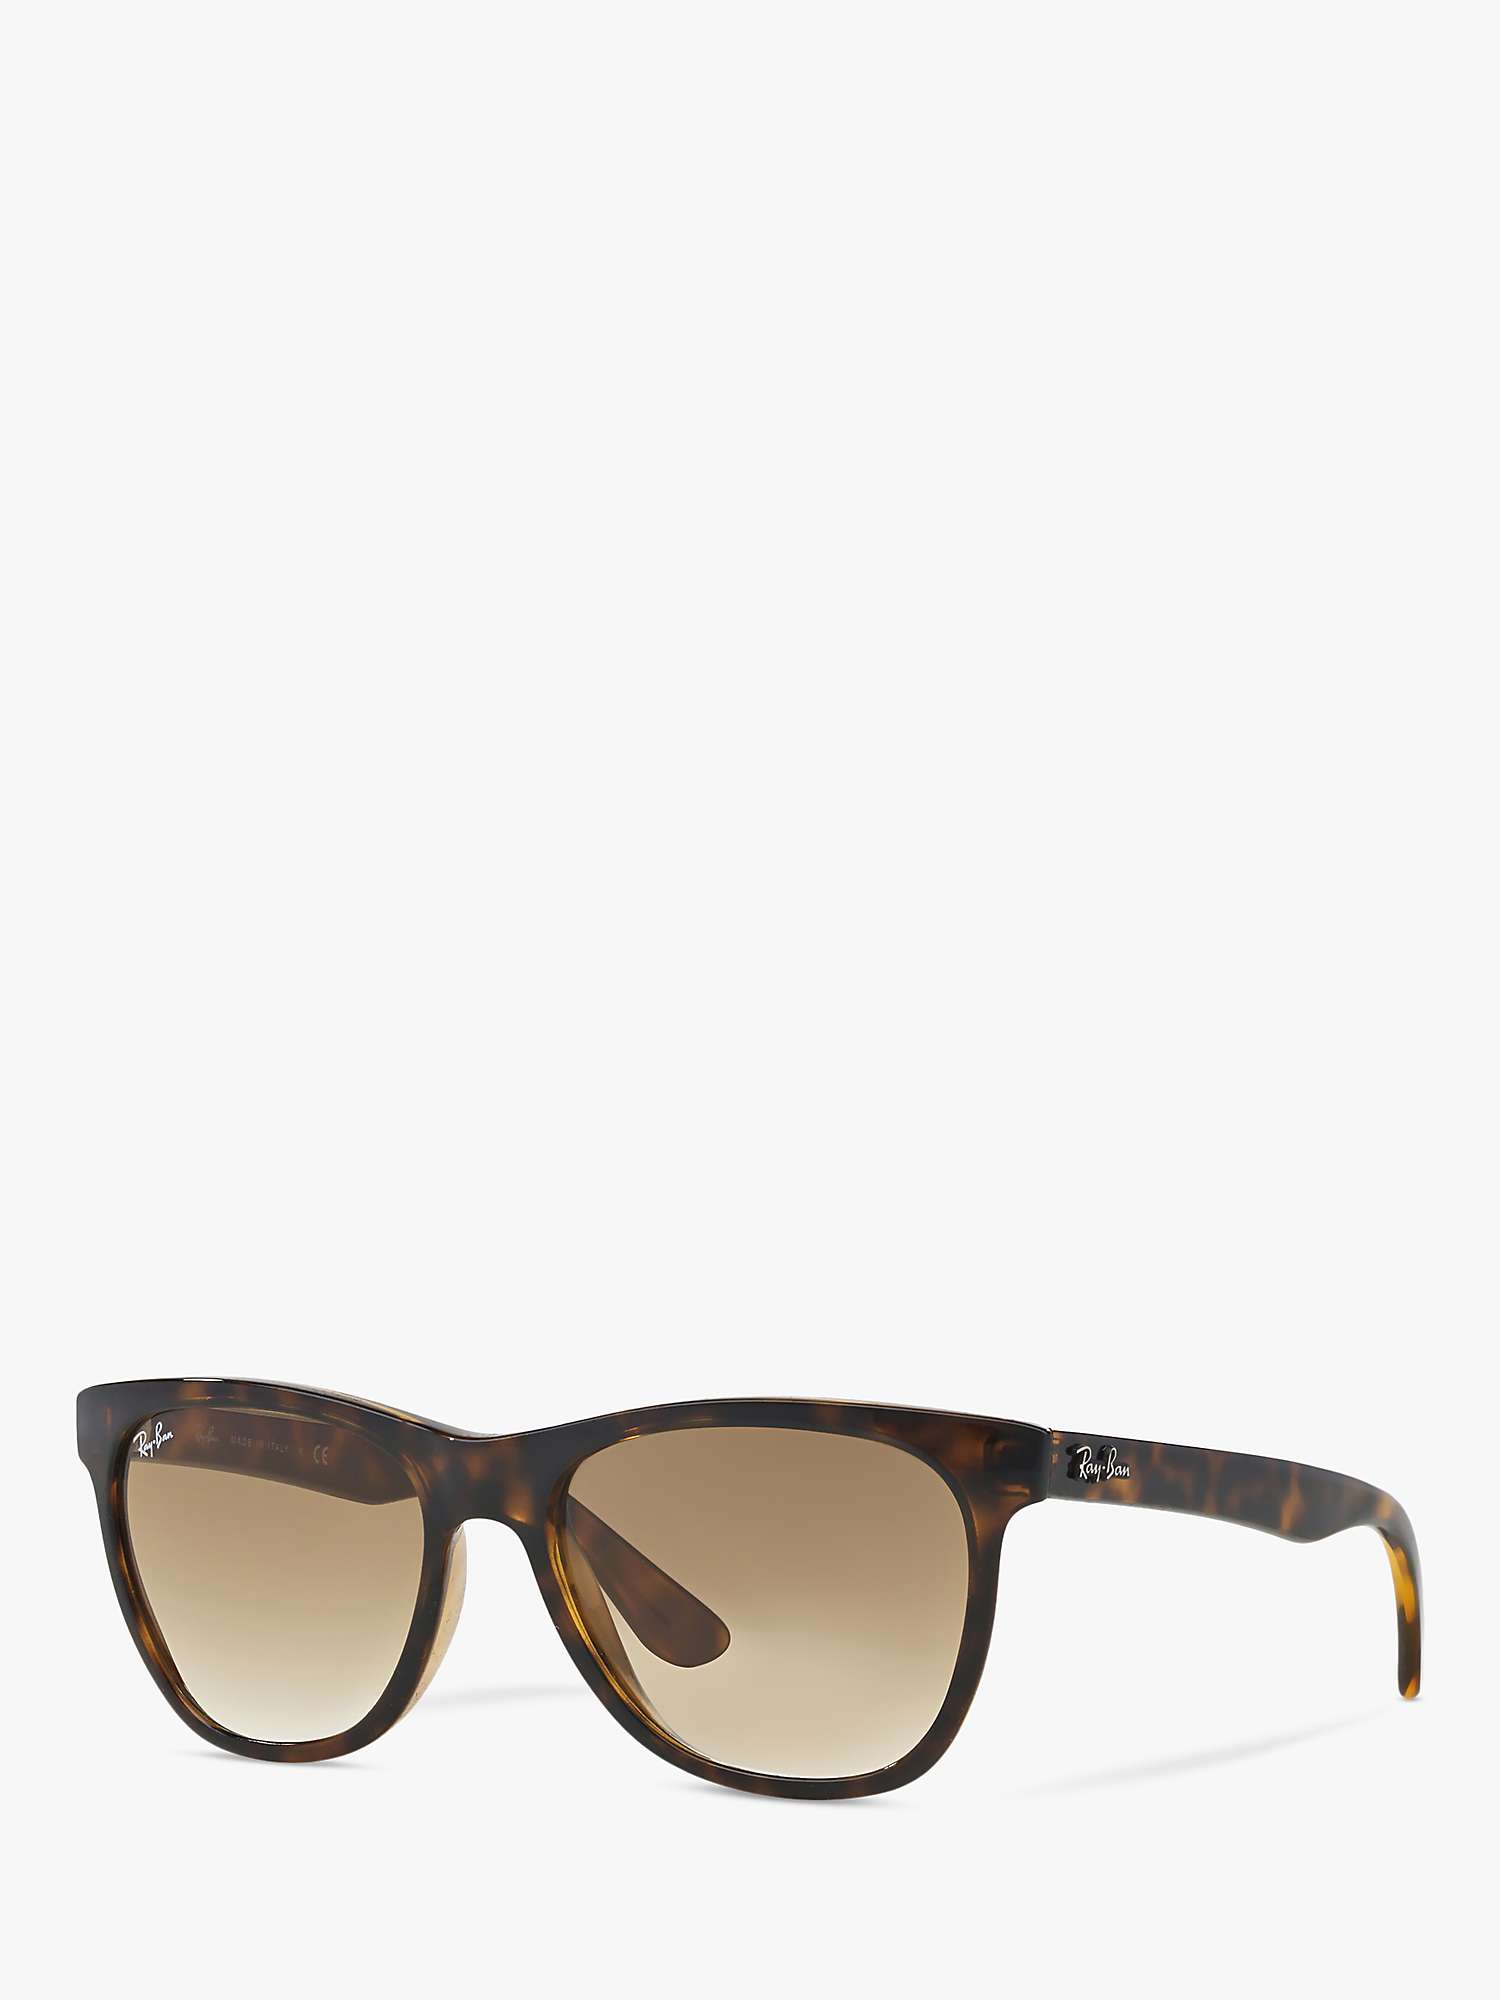 Buy Ray-Ban RB4184 710/51 Square Sunglasses, Tortoise Brown Online at johnlewis.com